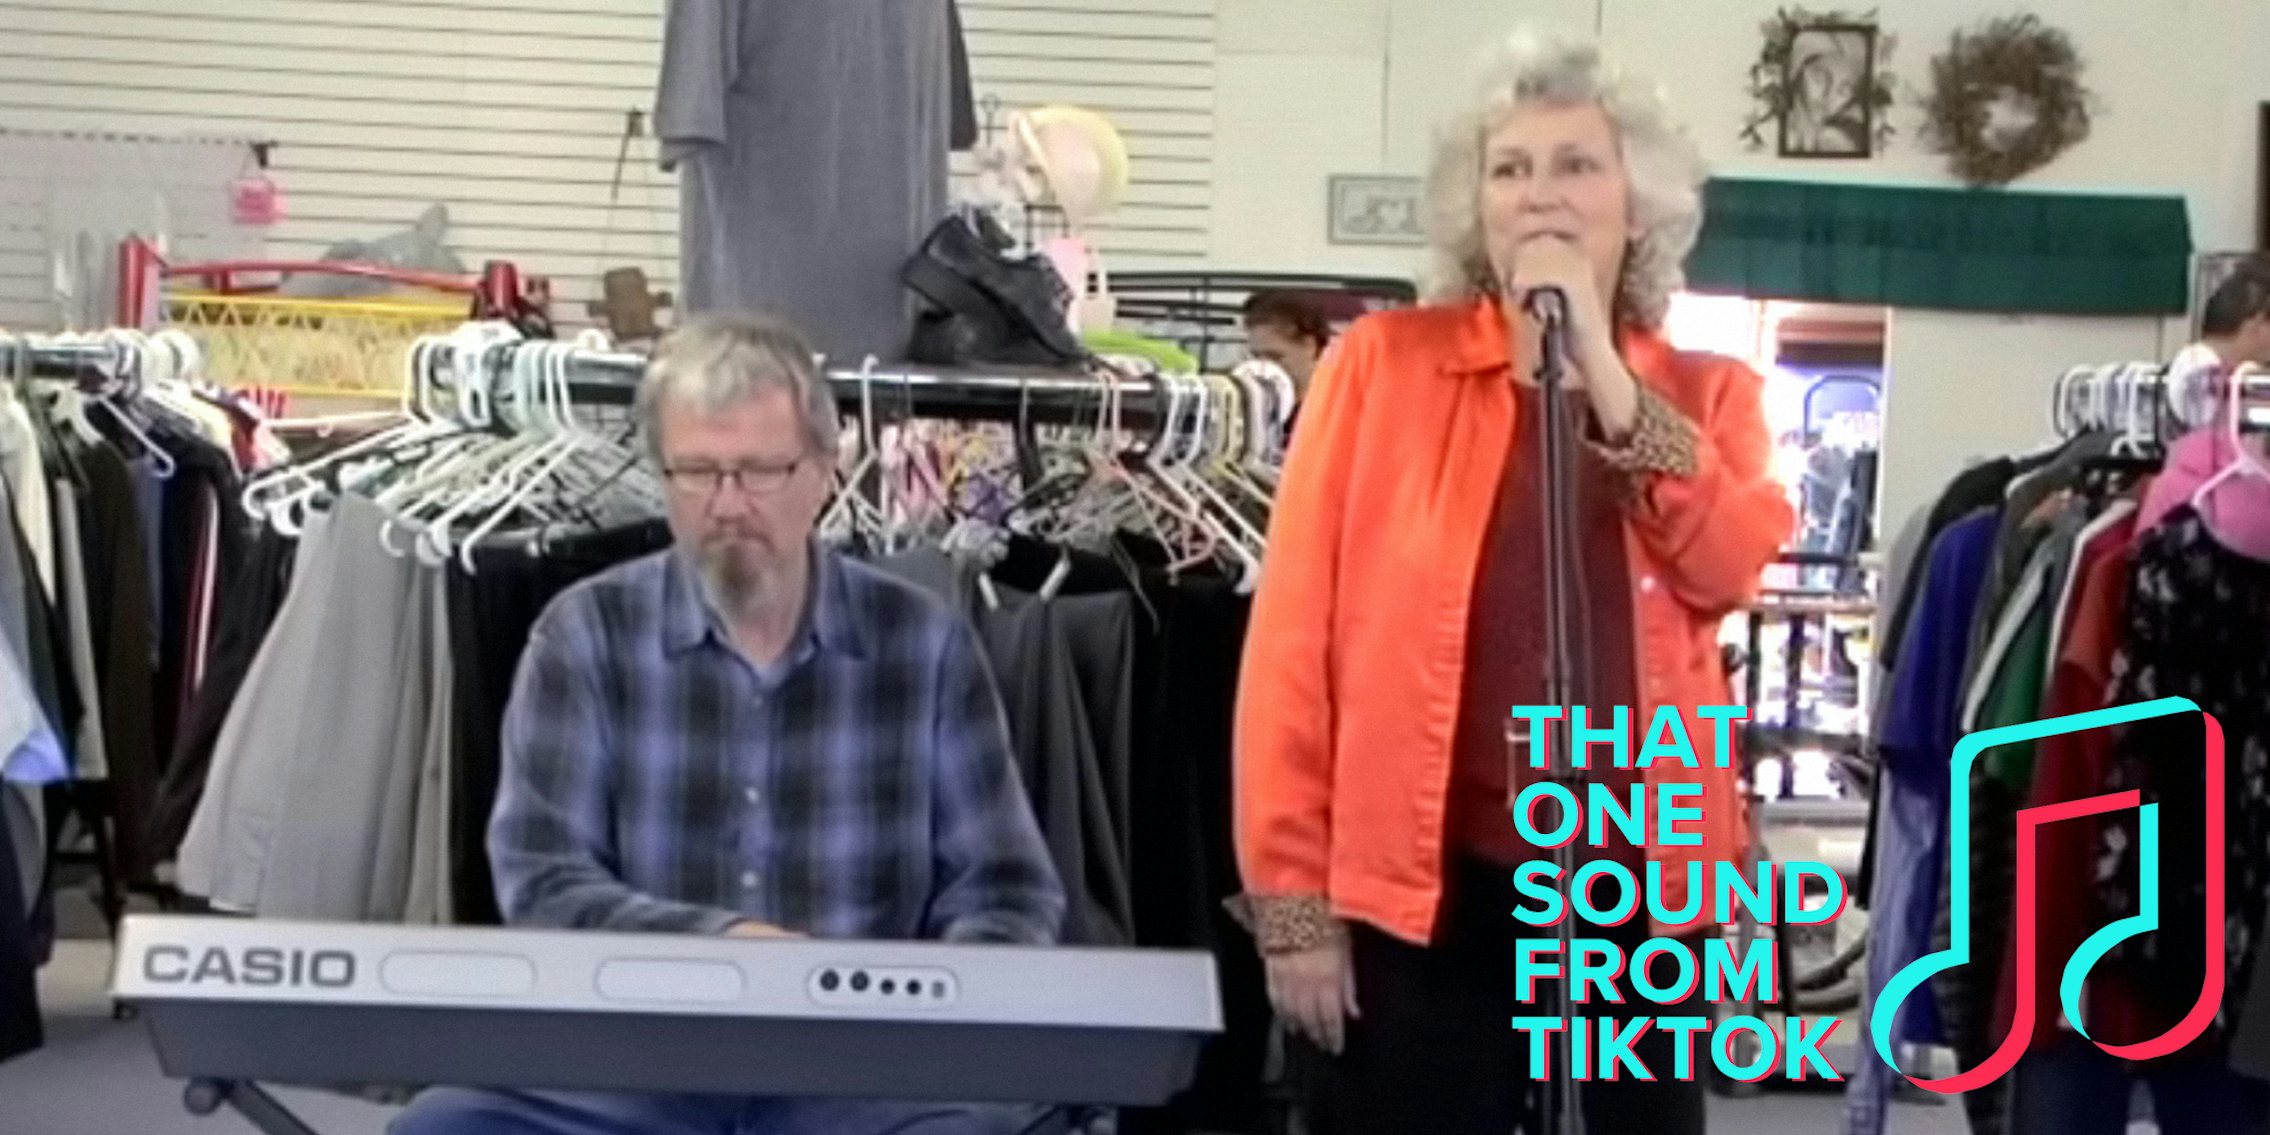 man playing keyboard and woman singing in clothing store with 'That one sound from TikTok' logo